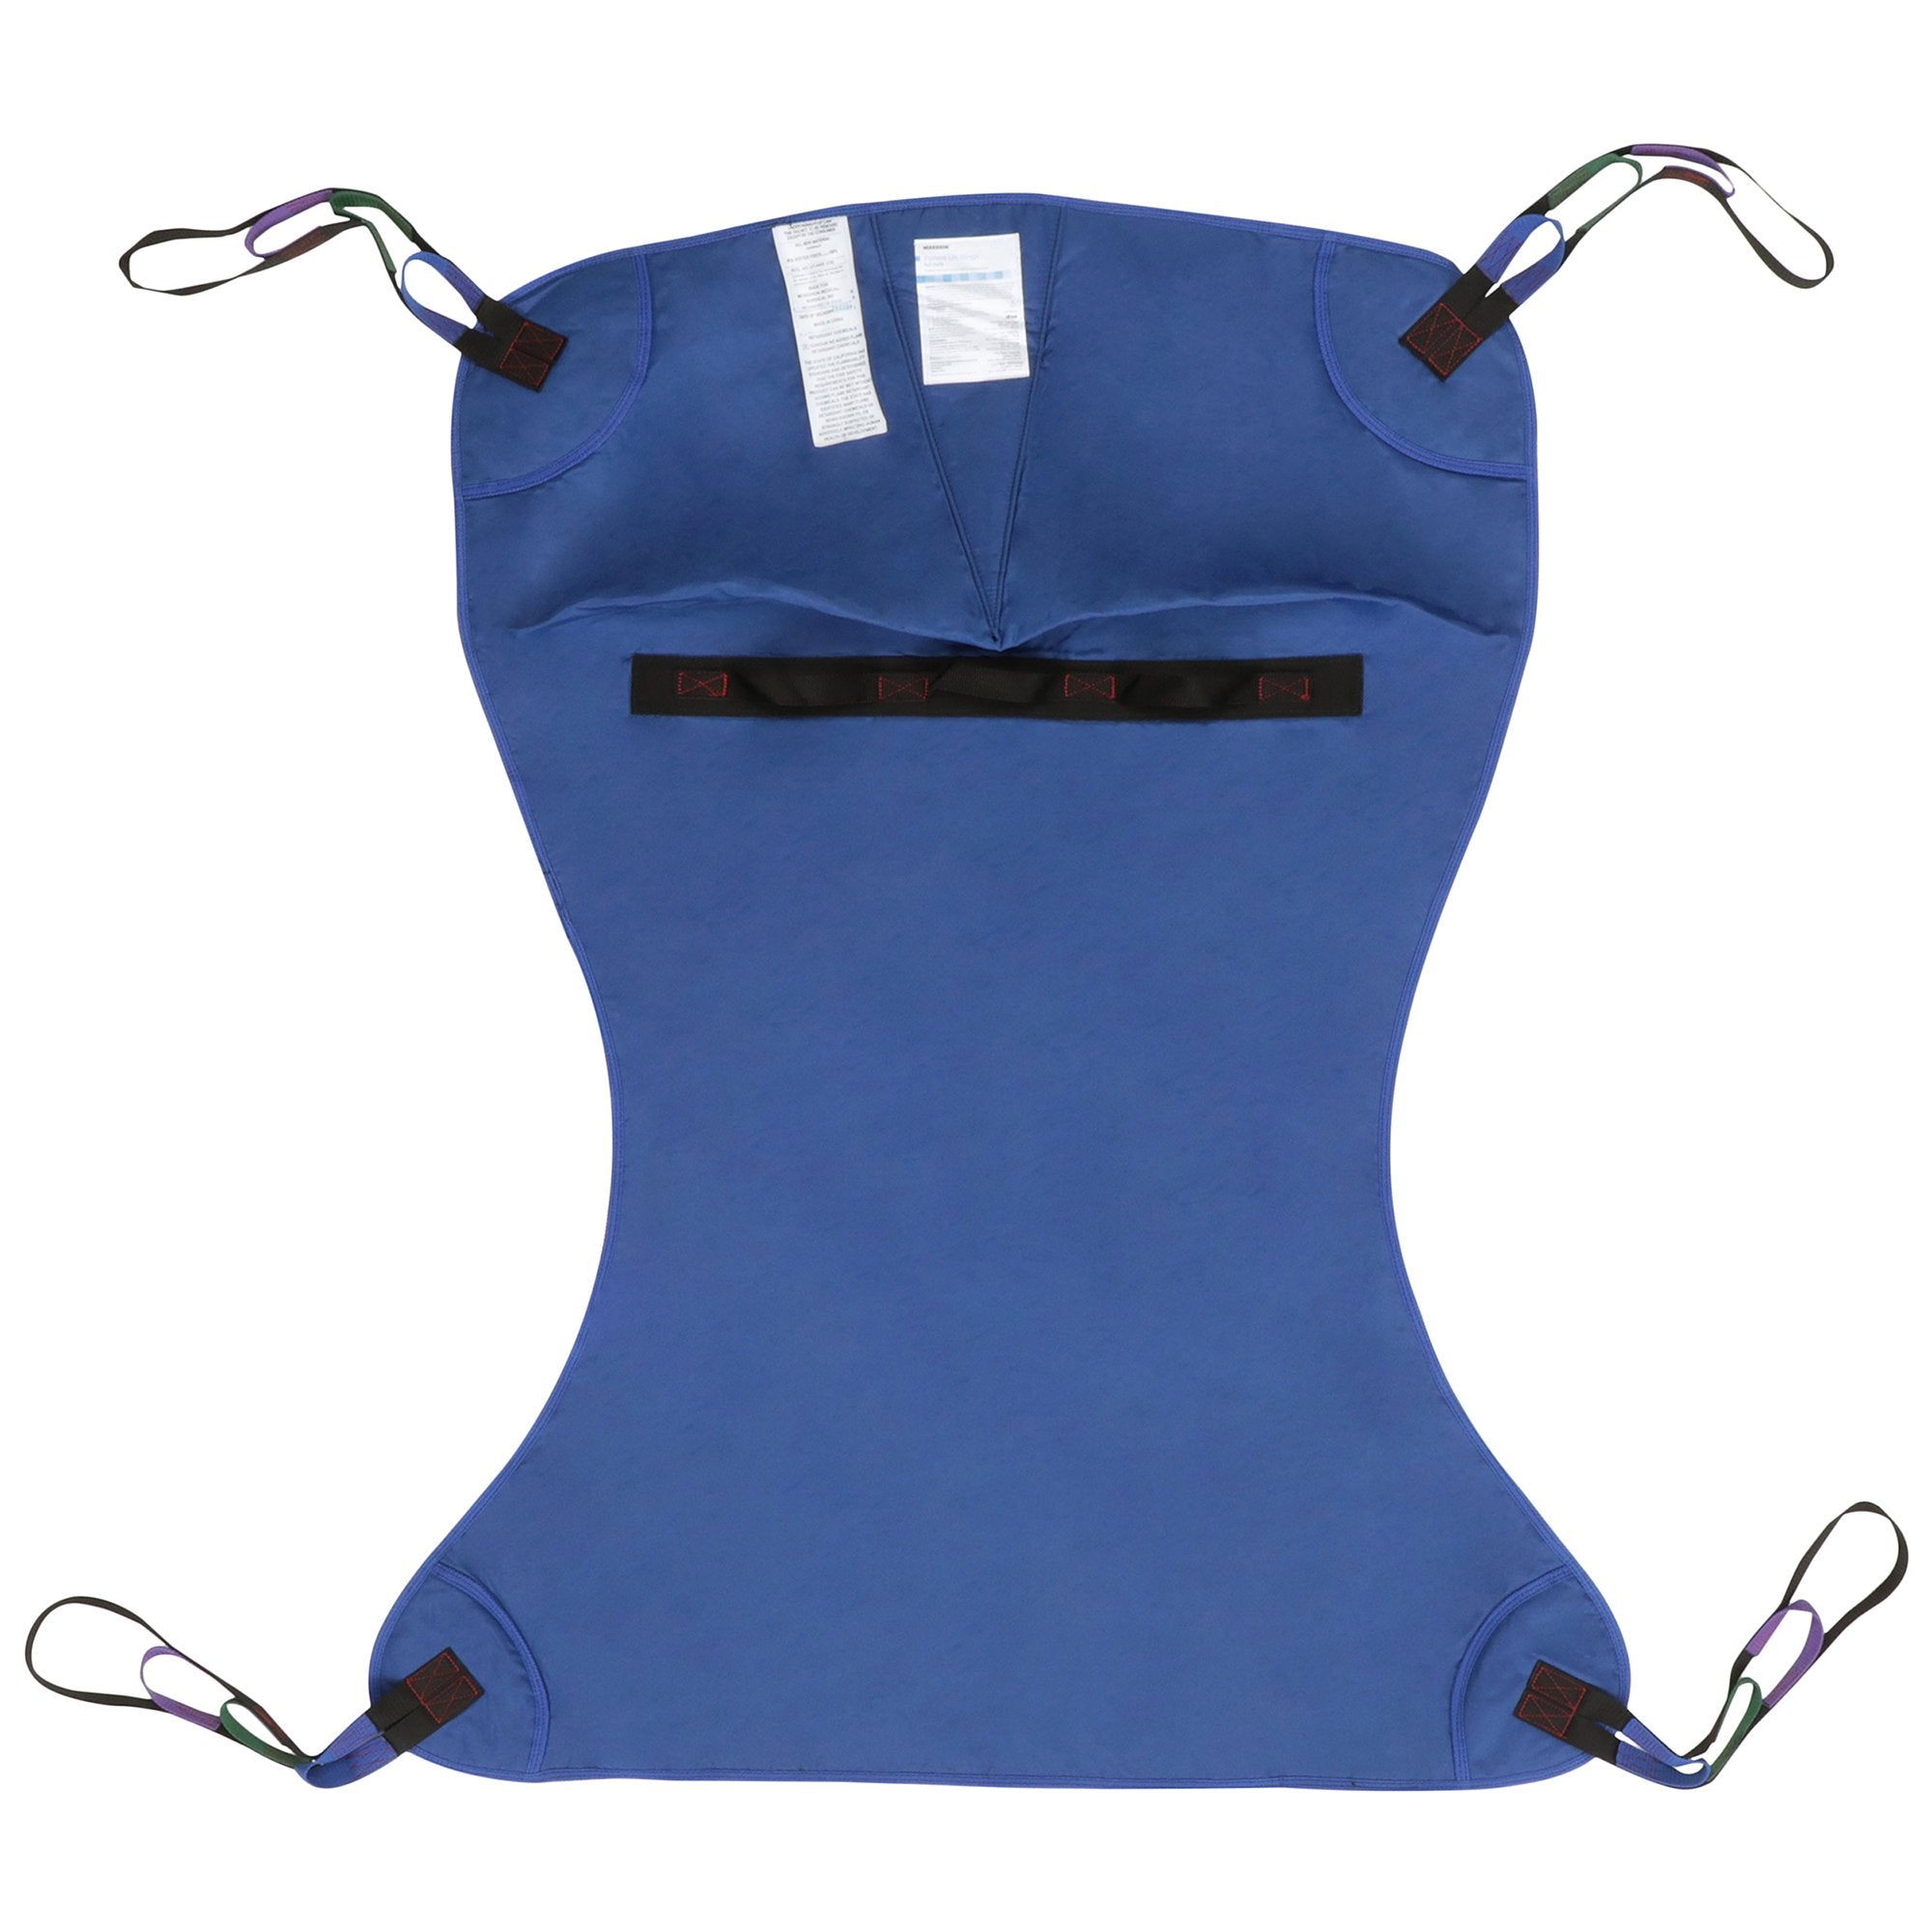 Full Body Sling McKesson 4 or 6 Point Without Head Support X-Large 600 lbs. Weight Capacity